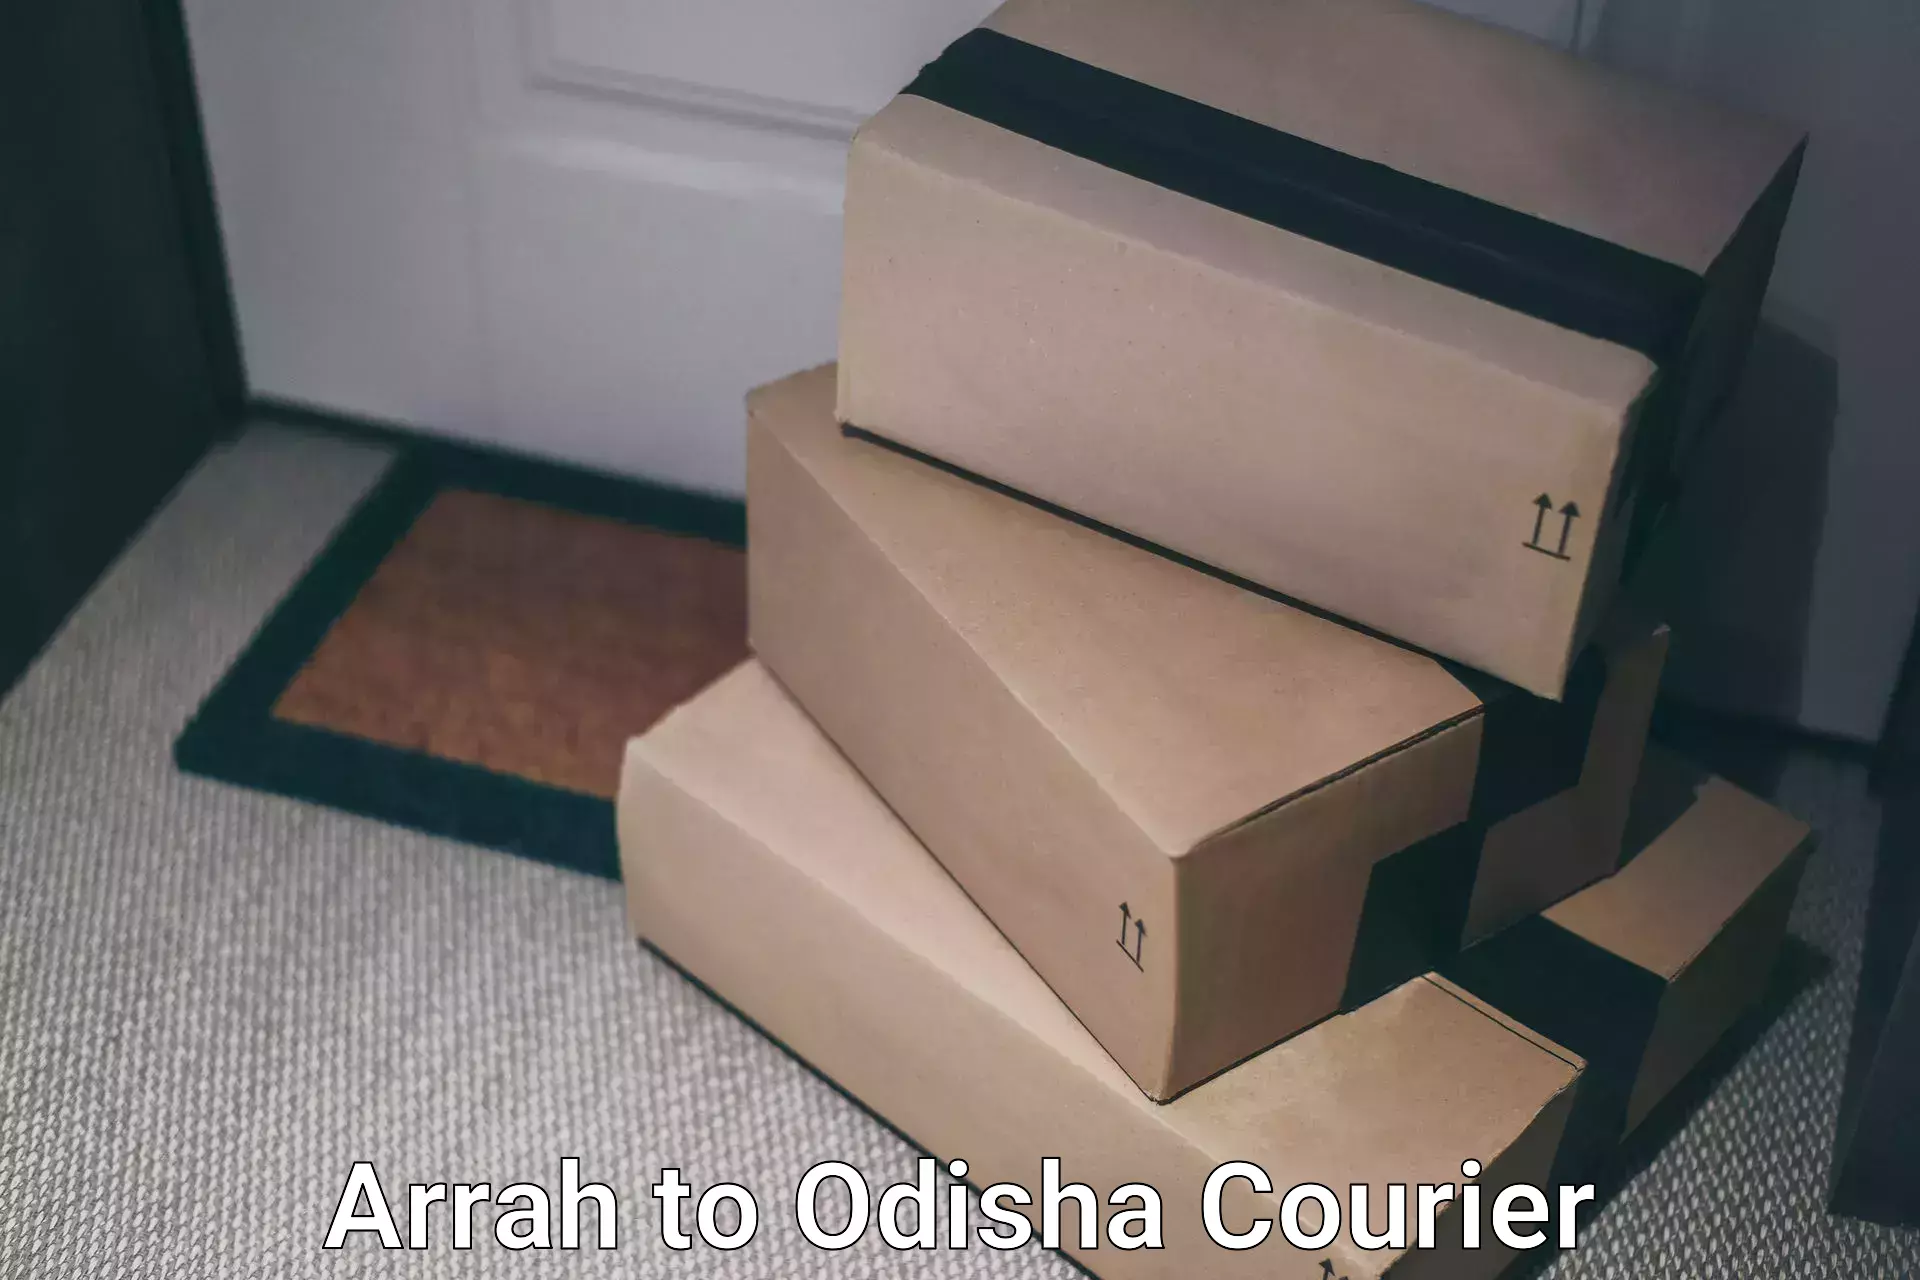 Reliable courier services in Arrah to Raruan